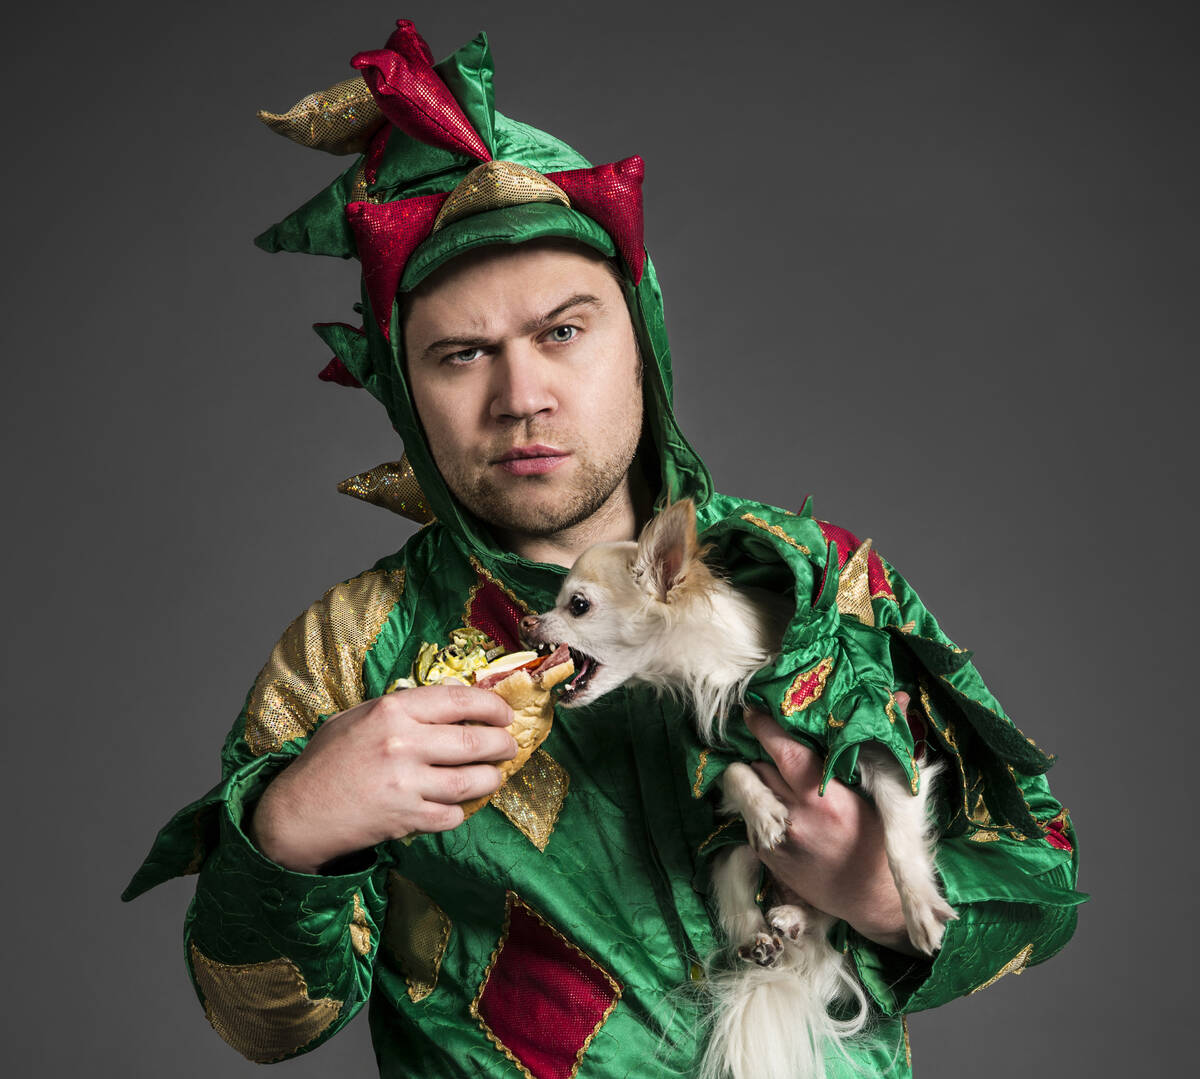 Piff the Magic Dragon with Mr. Piffles (Photo by Christopher DeVargas)